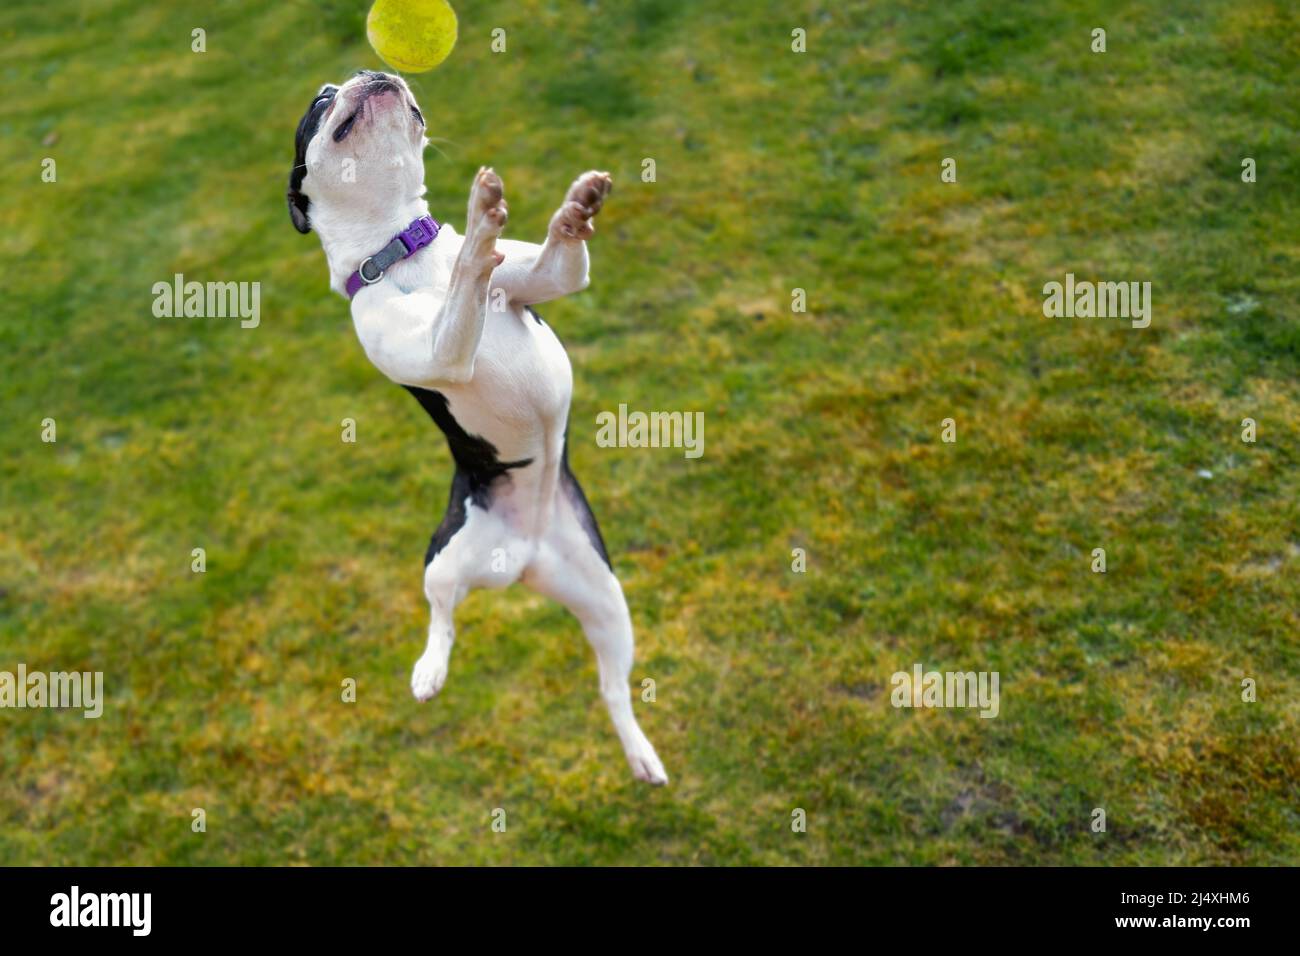 Young Boston Terrier puppy jumping at full stretch for a tennis ball. She is outside playing on the grass. Stock Photo